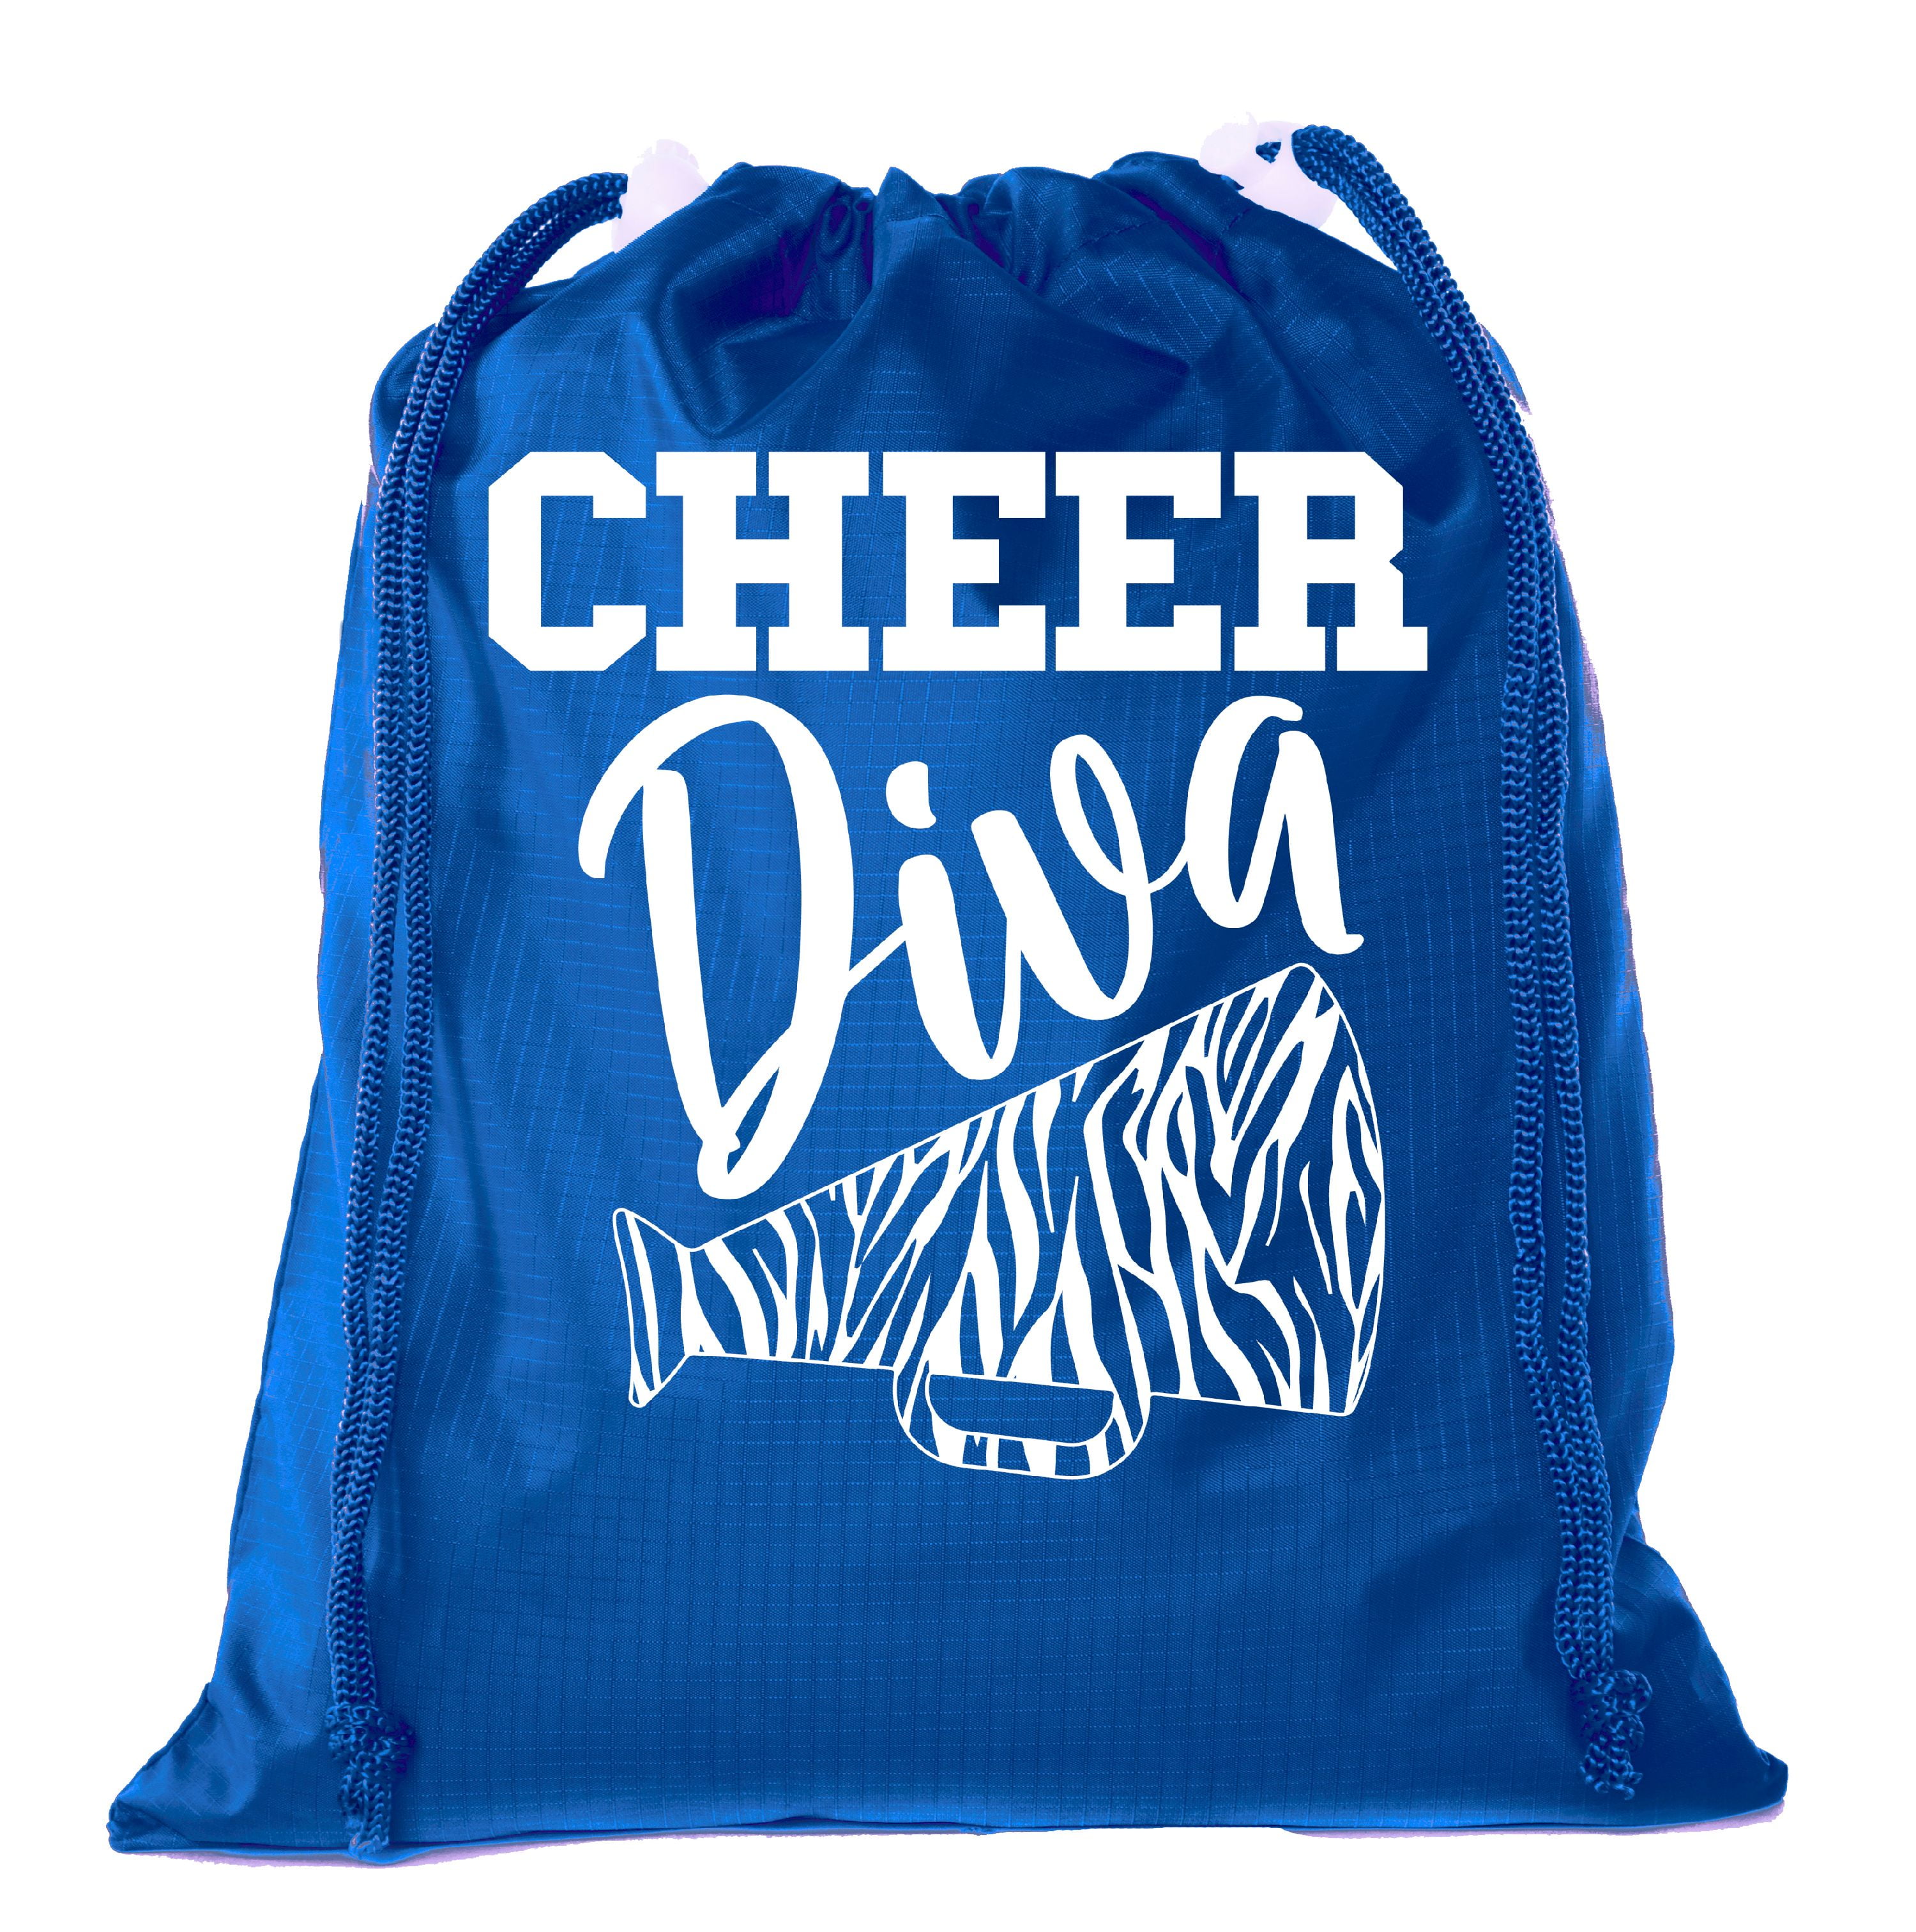 Share 78+ glitter cheer bags latest - in.cdgdbentre